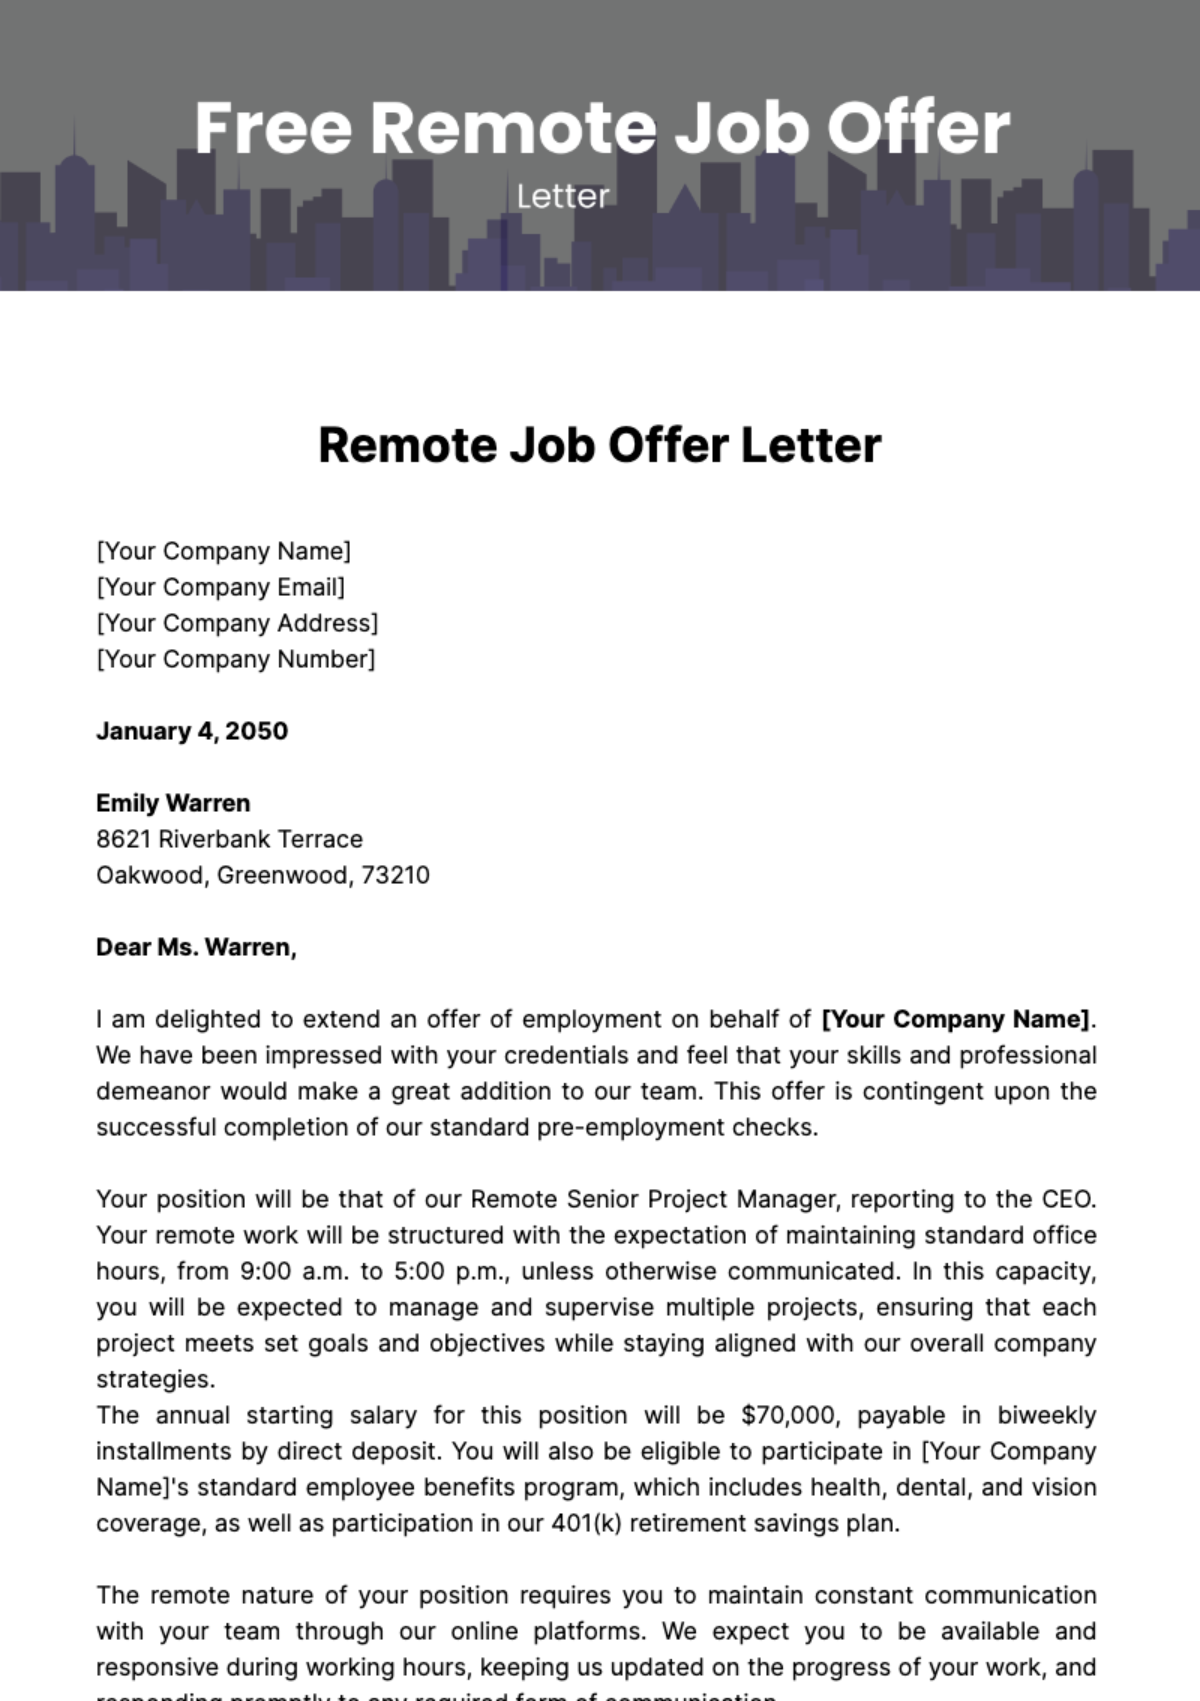 Free Remote Job Offer Letter Template